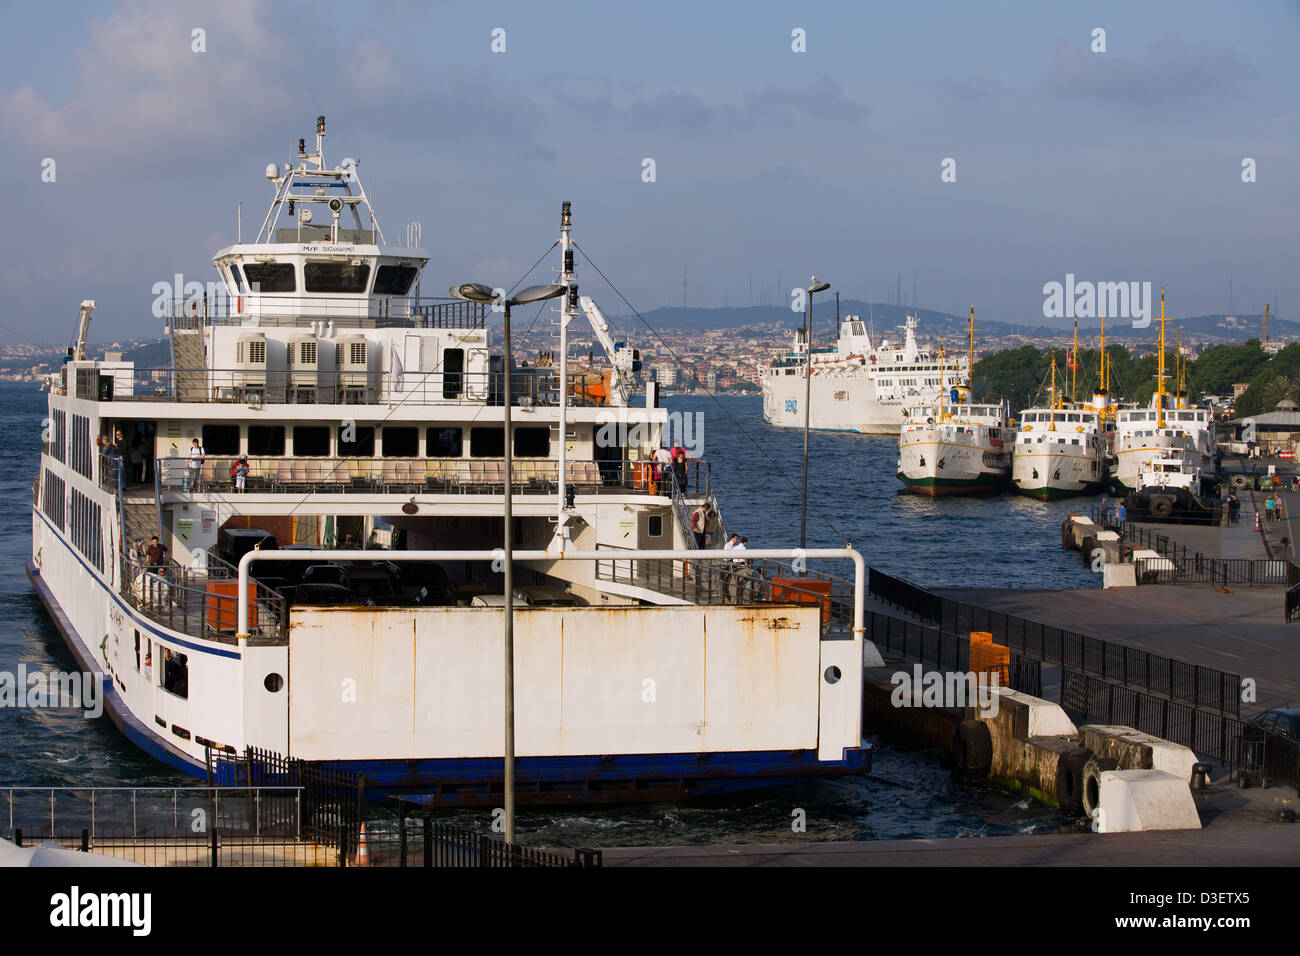 Passenger and car ferries docked at the port in Istanbul, Turkey. Stock Photo